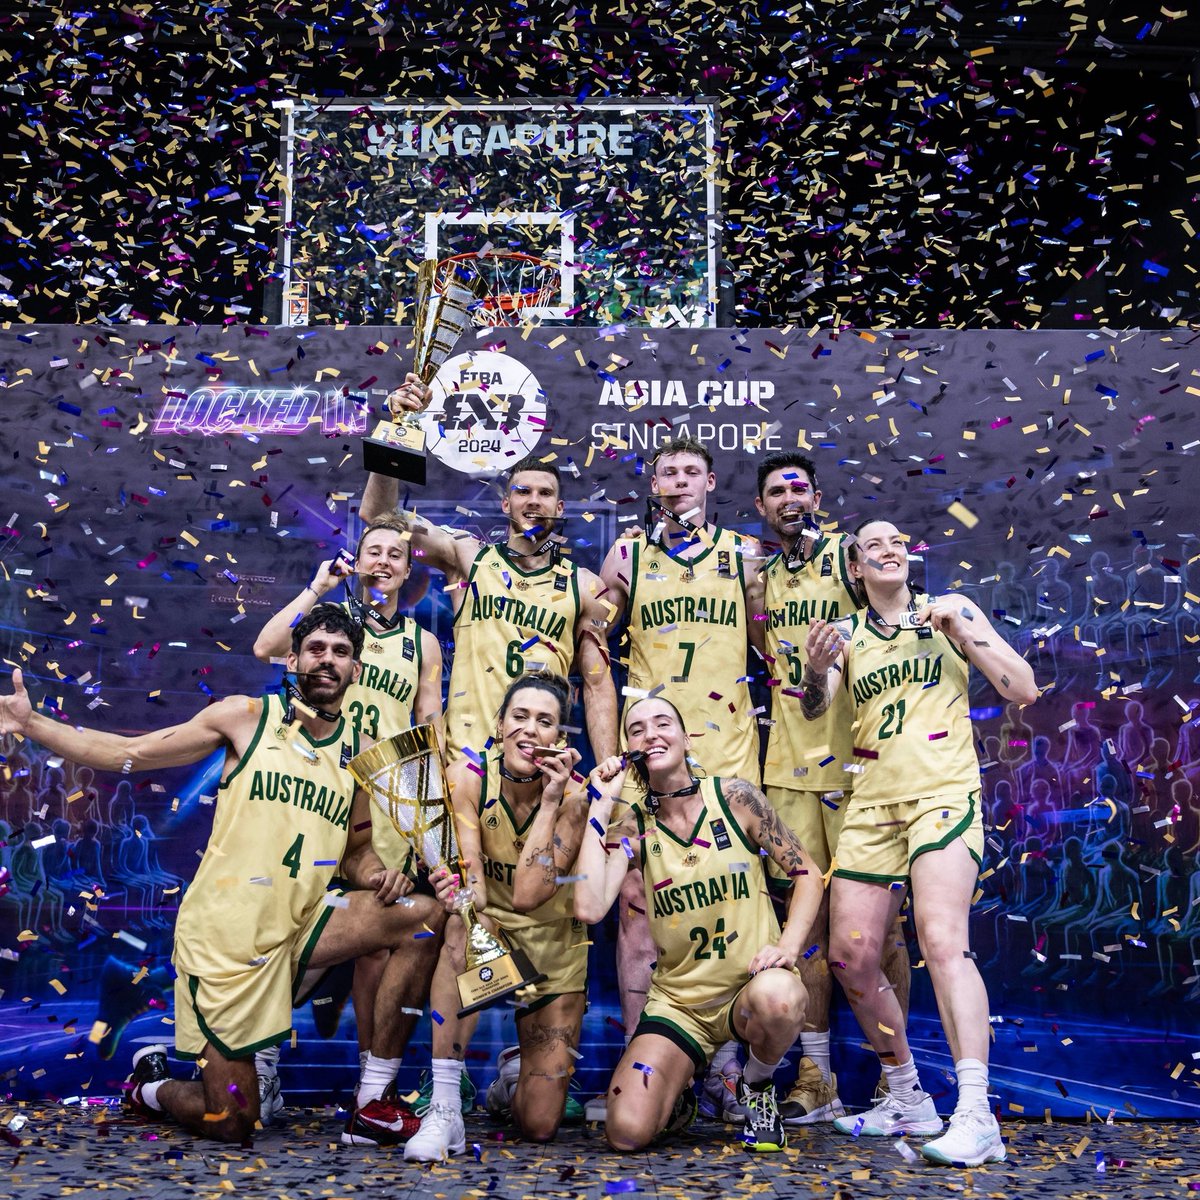 The Aussies' luggage will be a little heavier coming home, and we couldn't be prouder. 🏆🏆🧳 Congrats, Gangurrus! Full details ➡️ bit.ly/3PL8Pxs #WeAreBasketball #3x3Asia